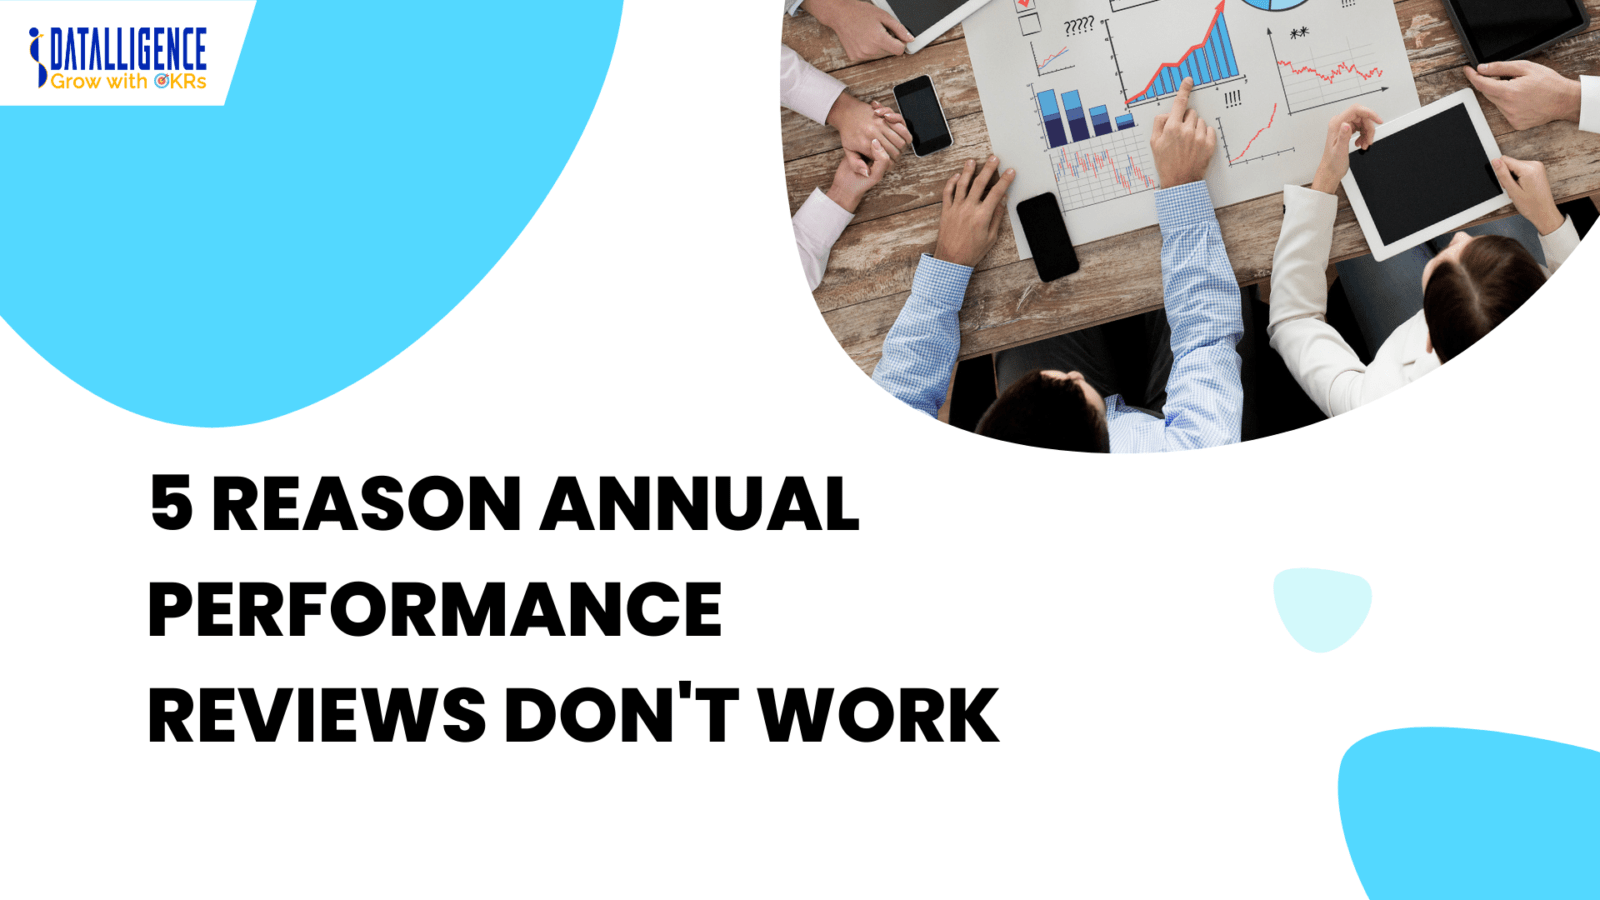 5 Reason Annual Performance Reviews Don't Work